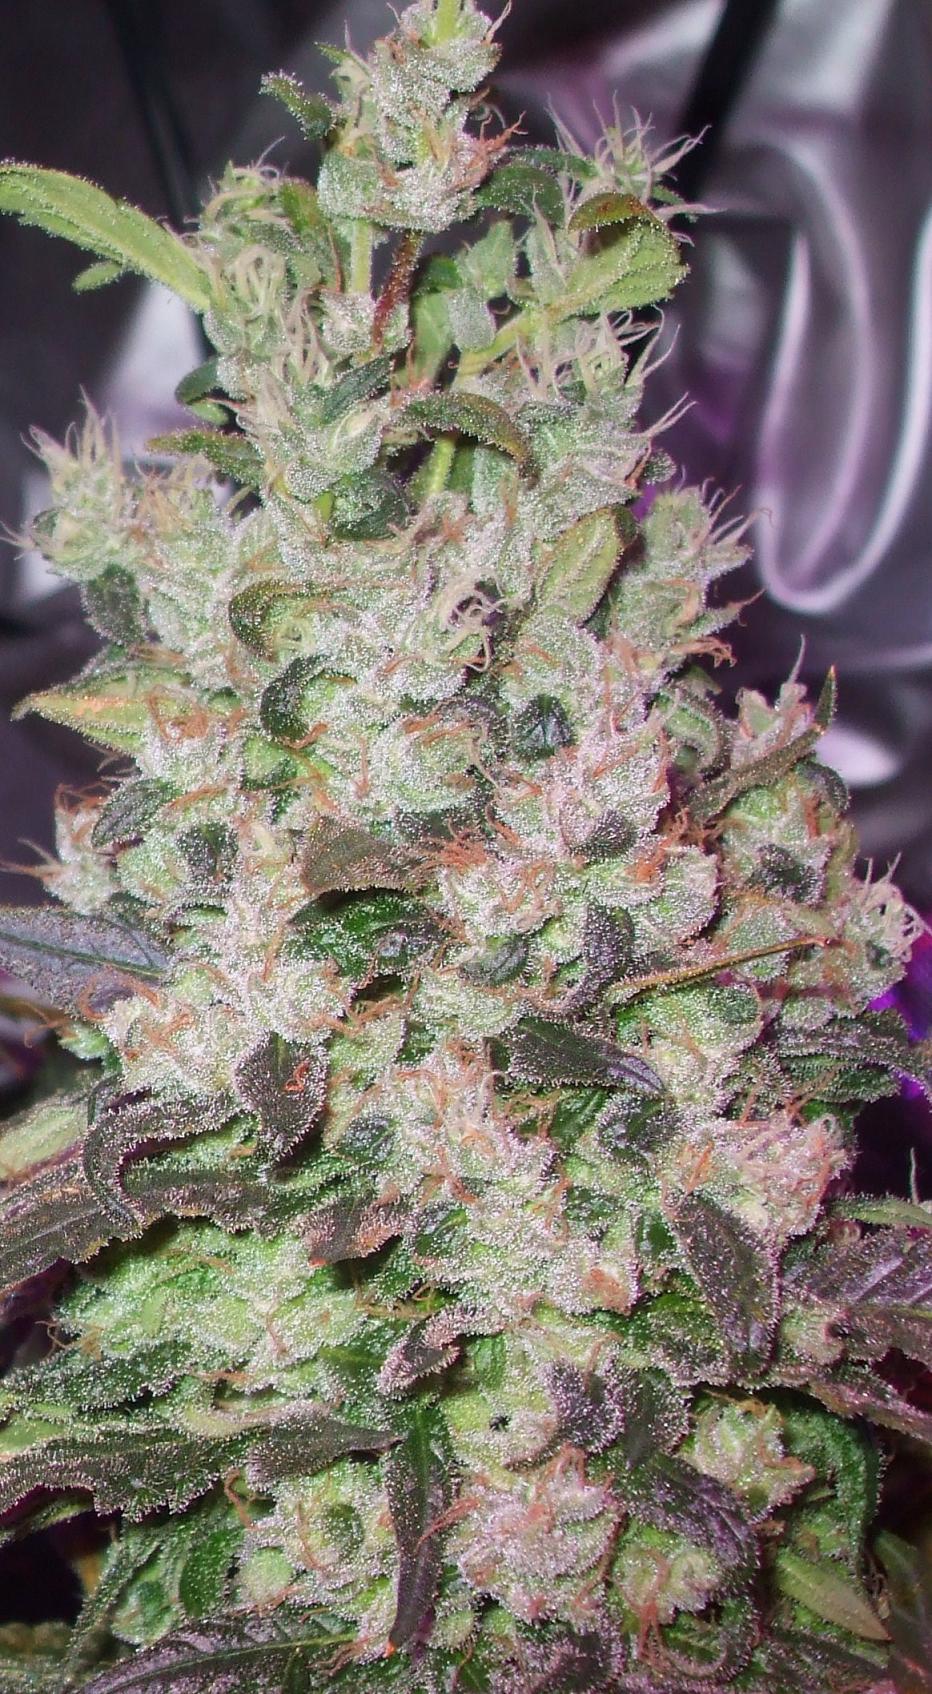 frosty nuggets